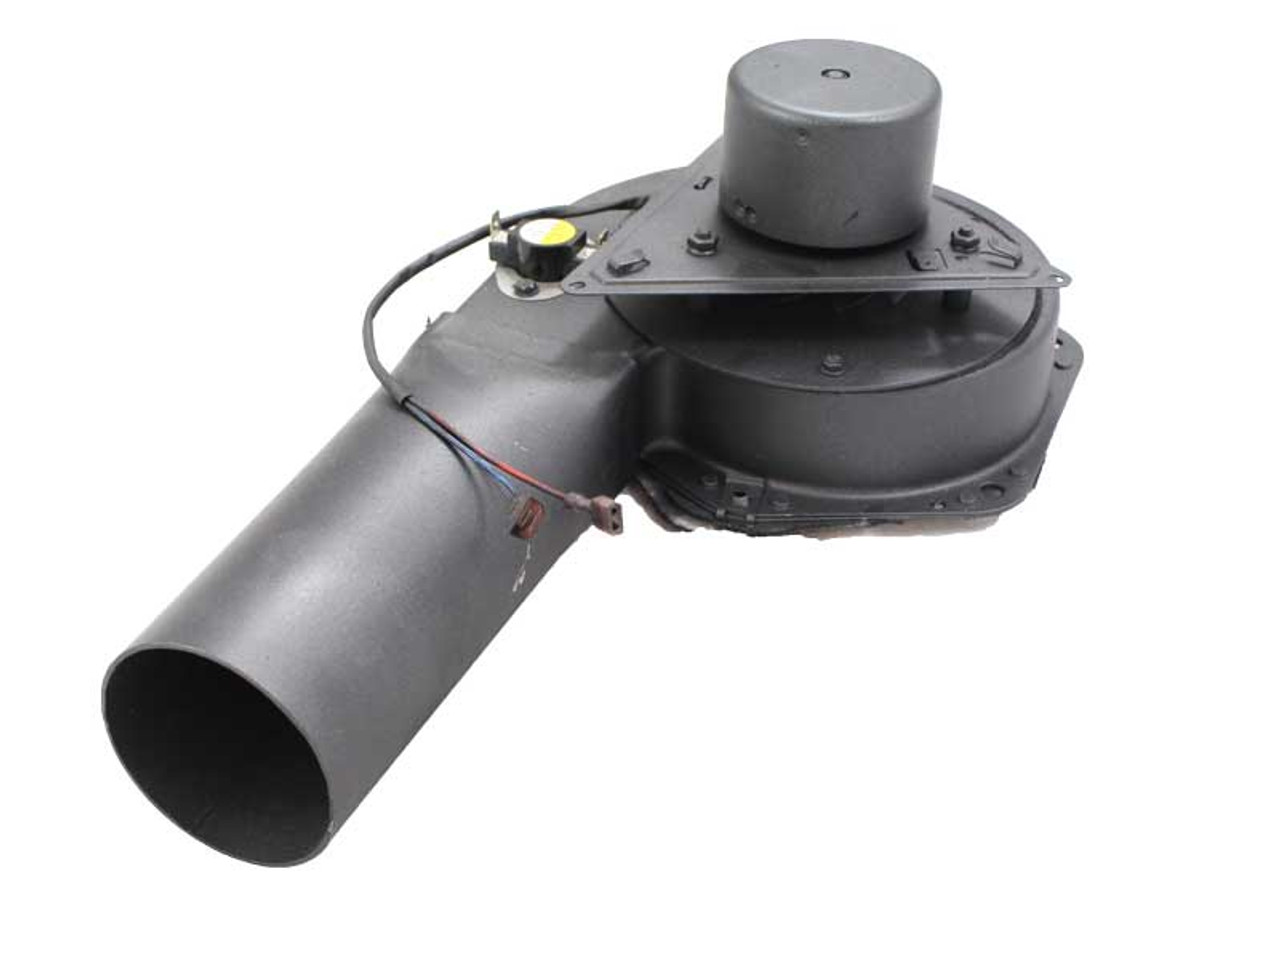 MagnuM DC Combustion Blower with Tube Attached (RP2027-KIT)